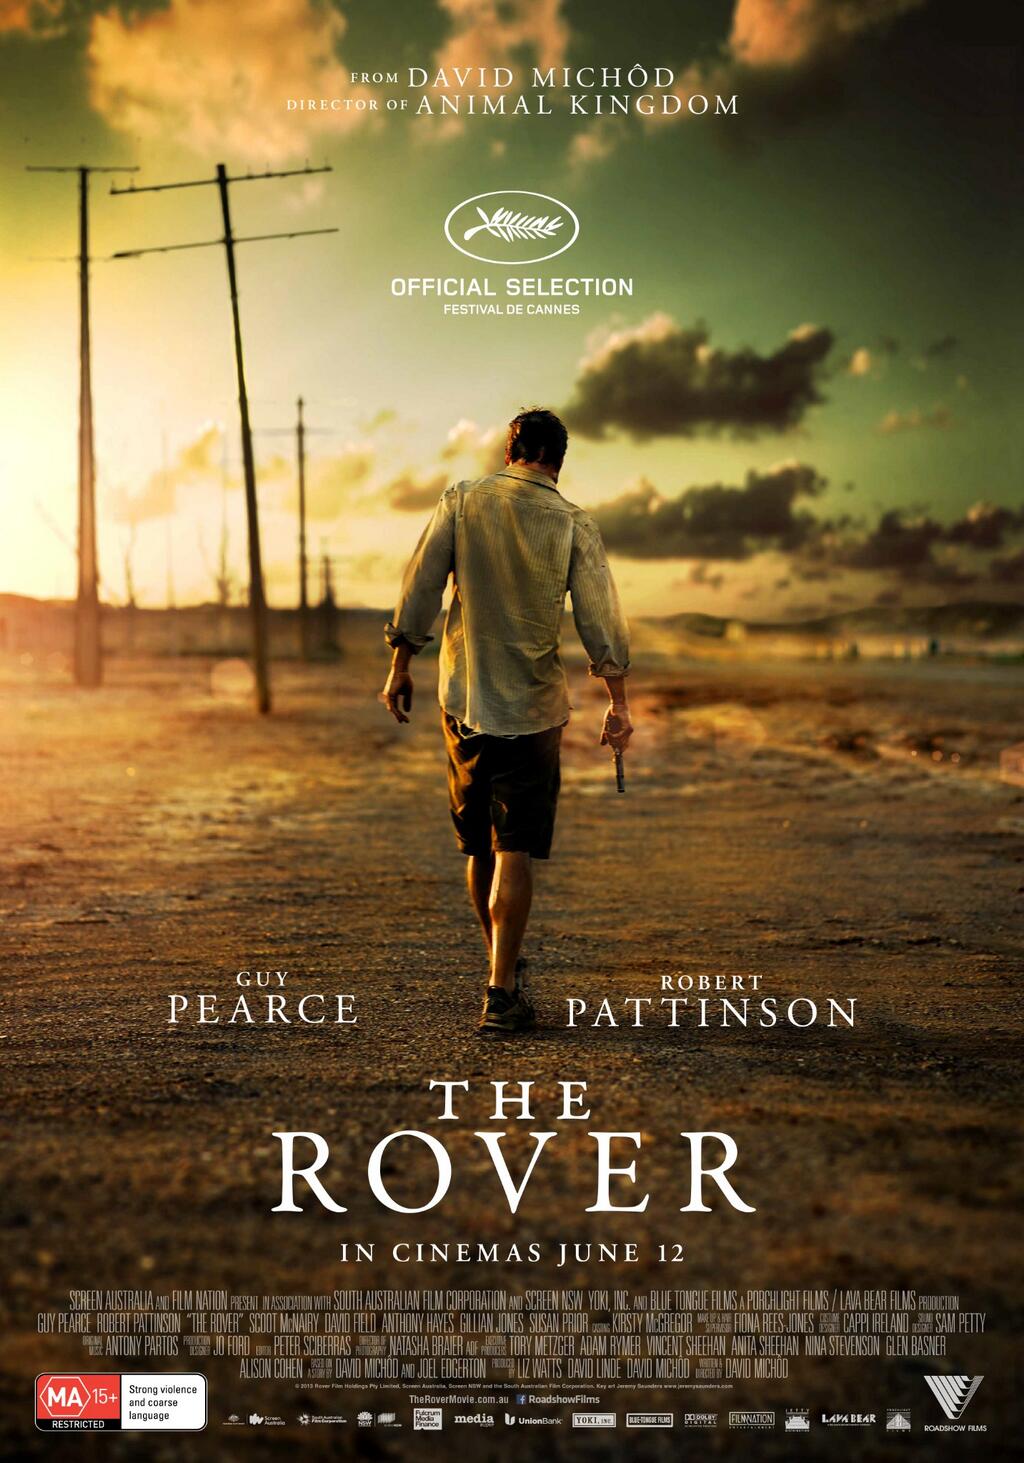 therover-poster03.jpeg